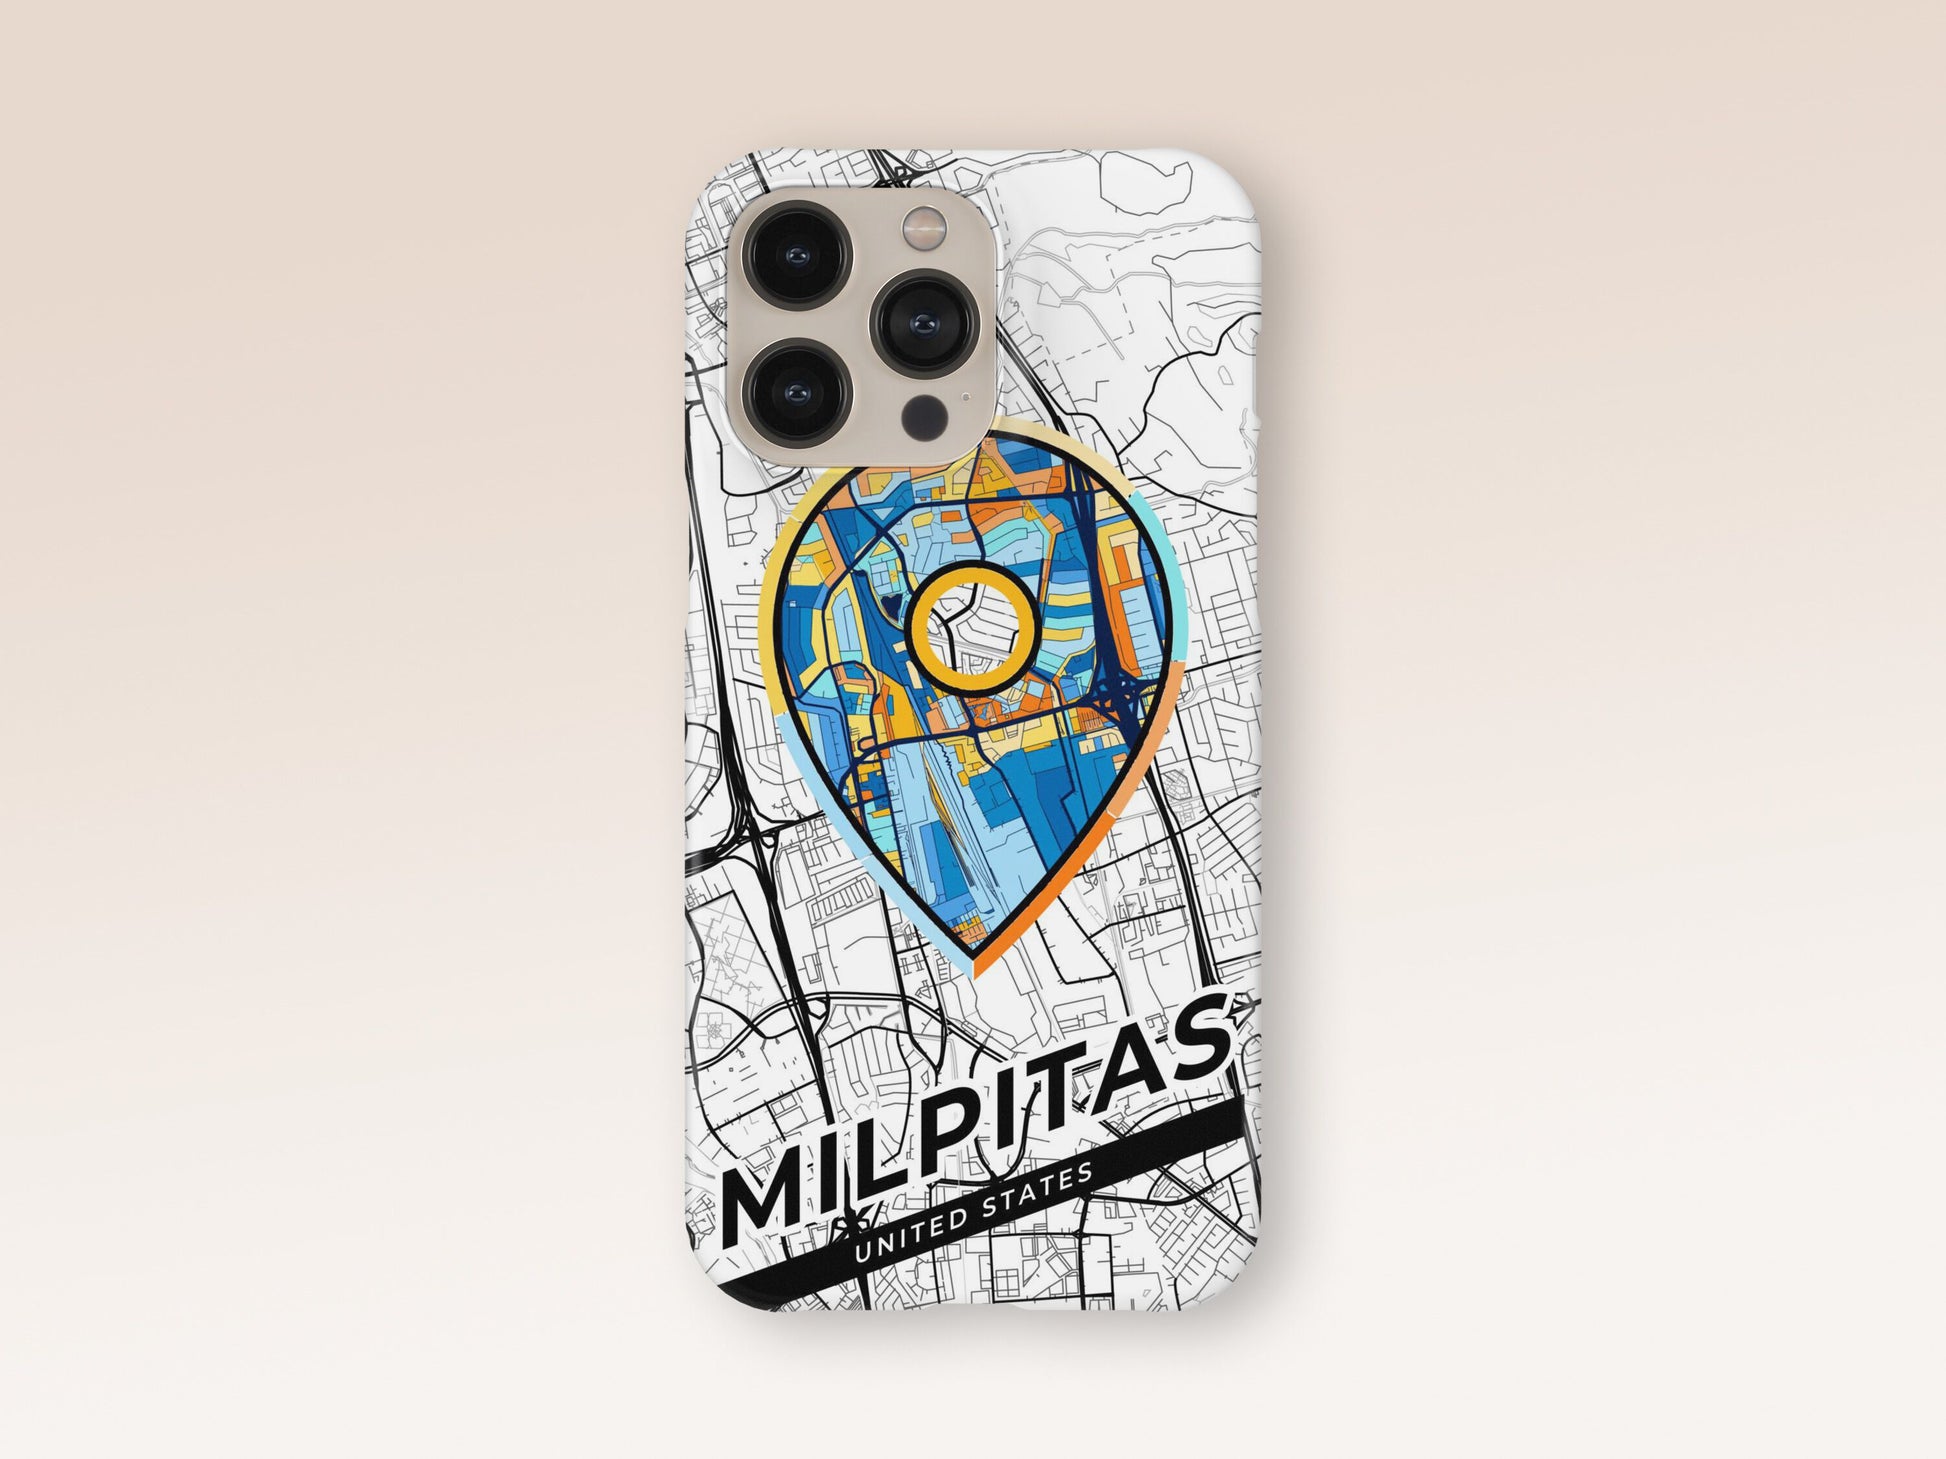 Milpitas California slim phone case with colorful icon 1